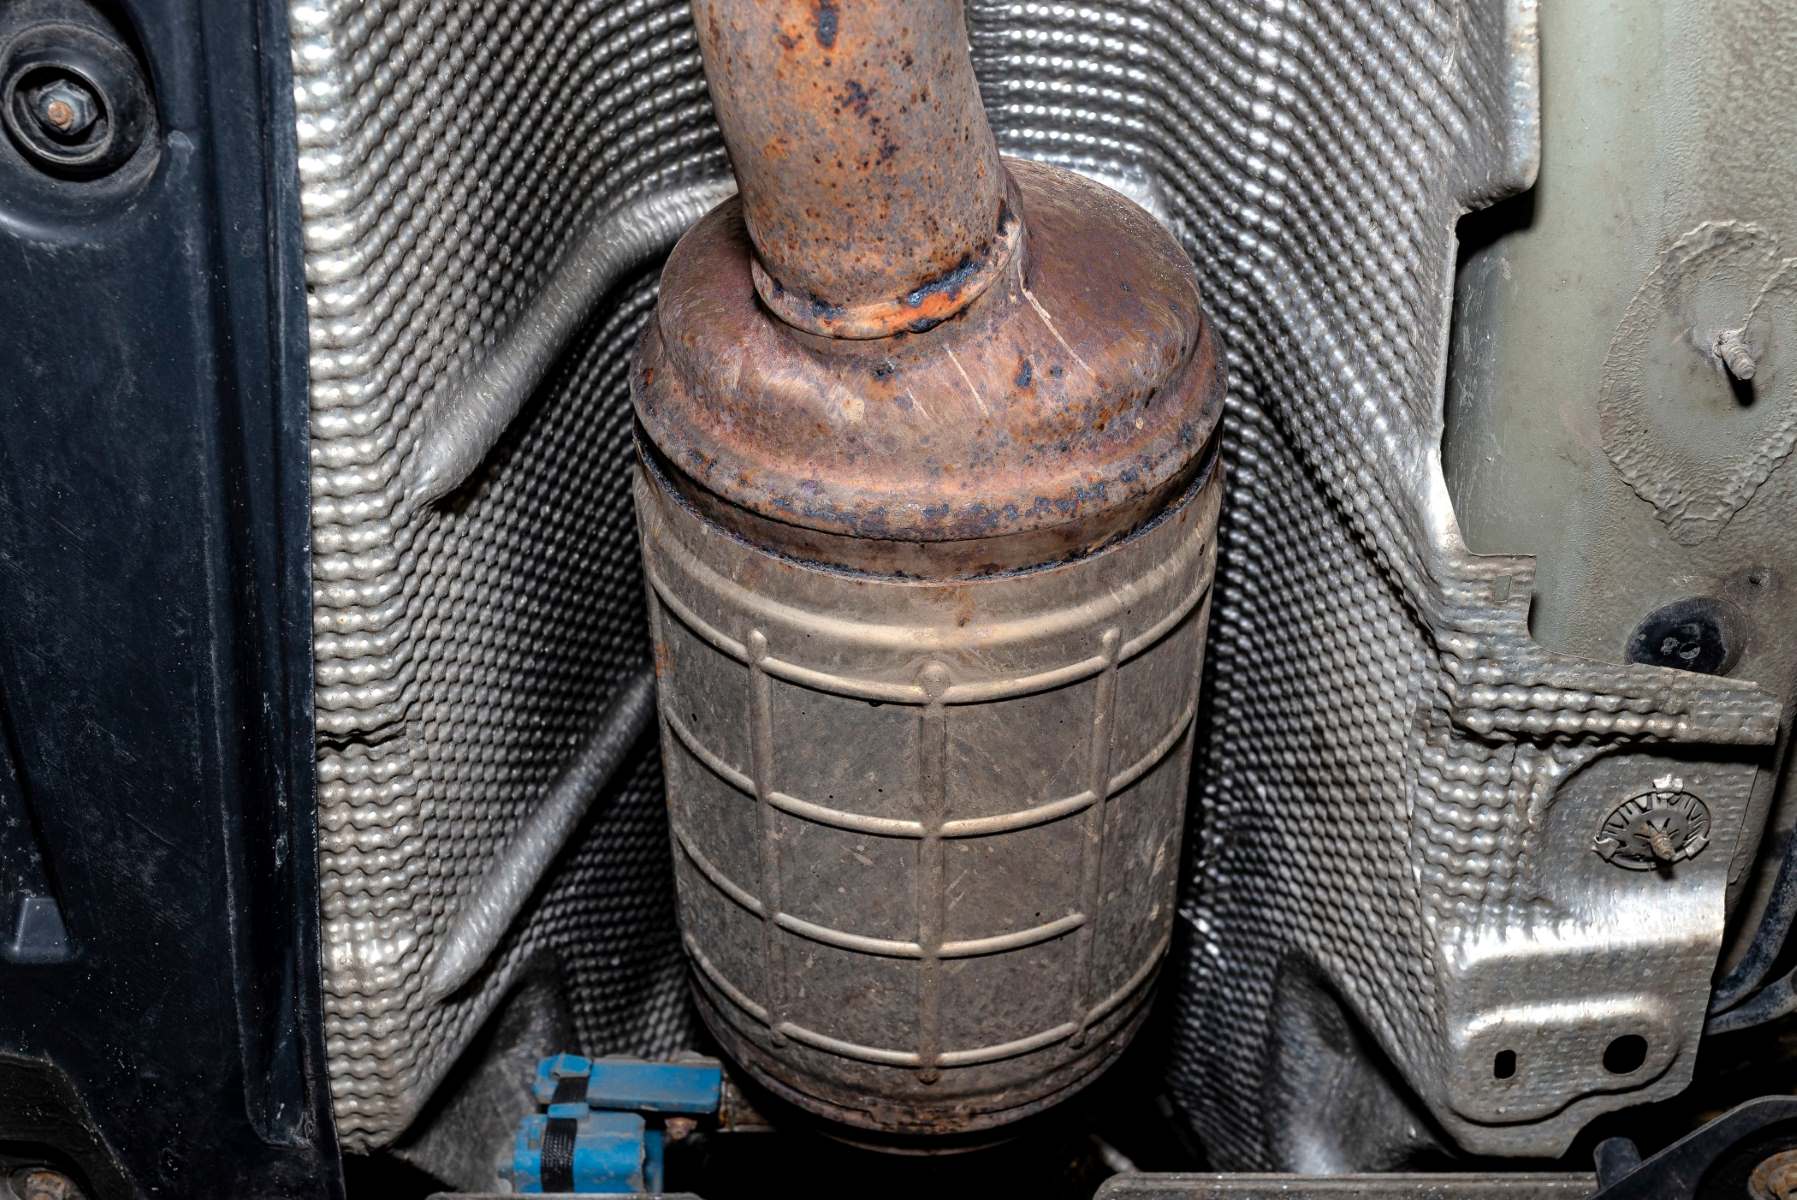 Affordable Legal Options For Catalytic Converter Repair After Cleaning Solution Failed